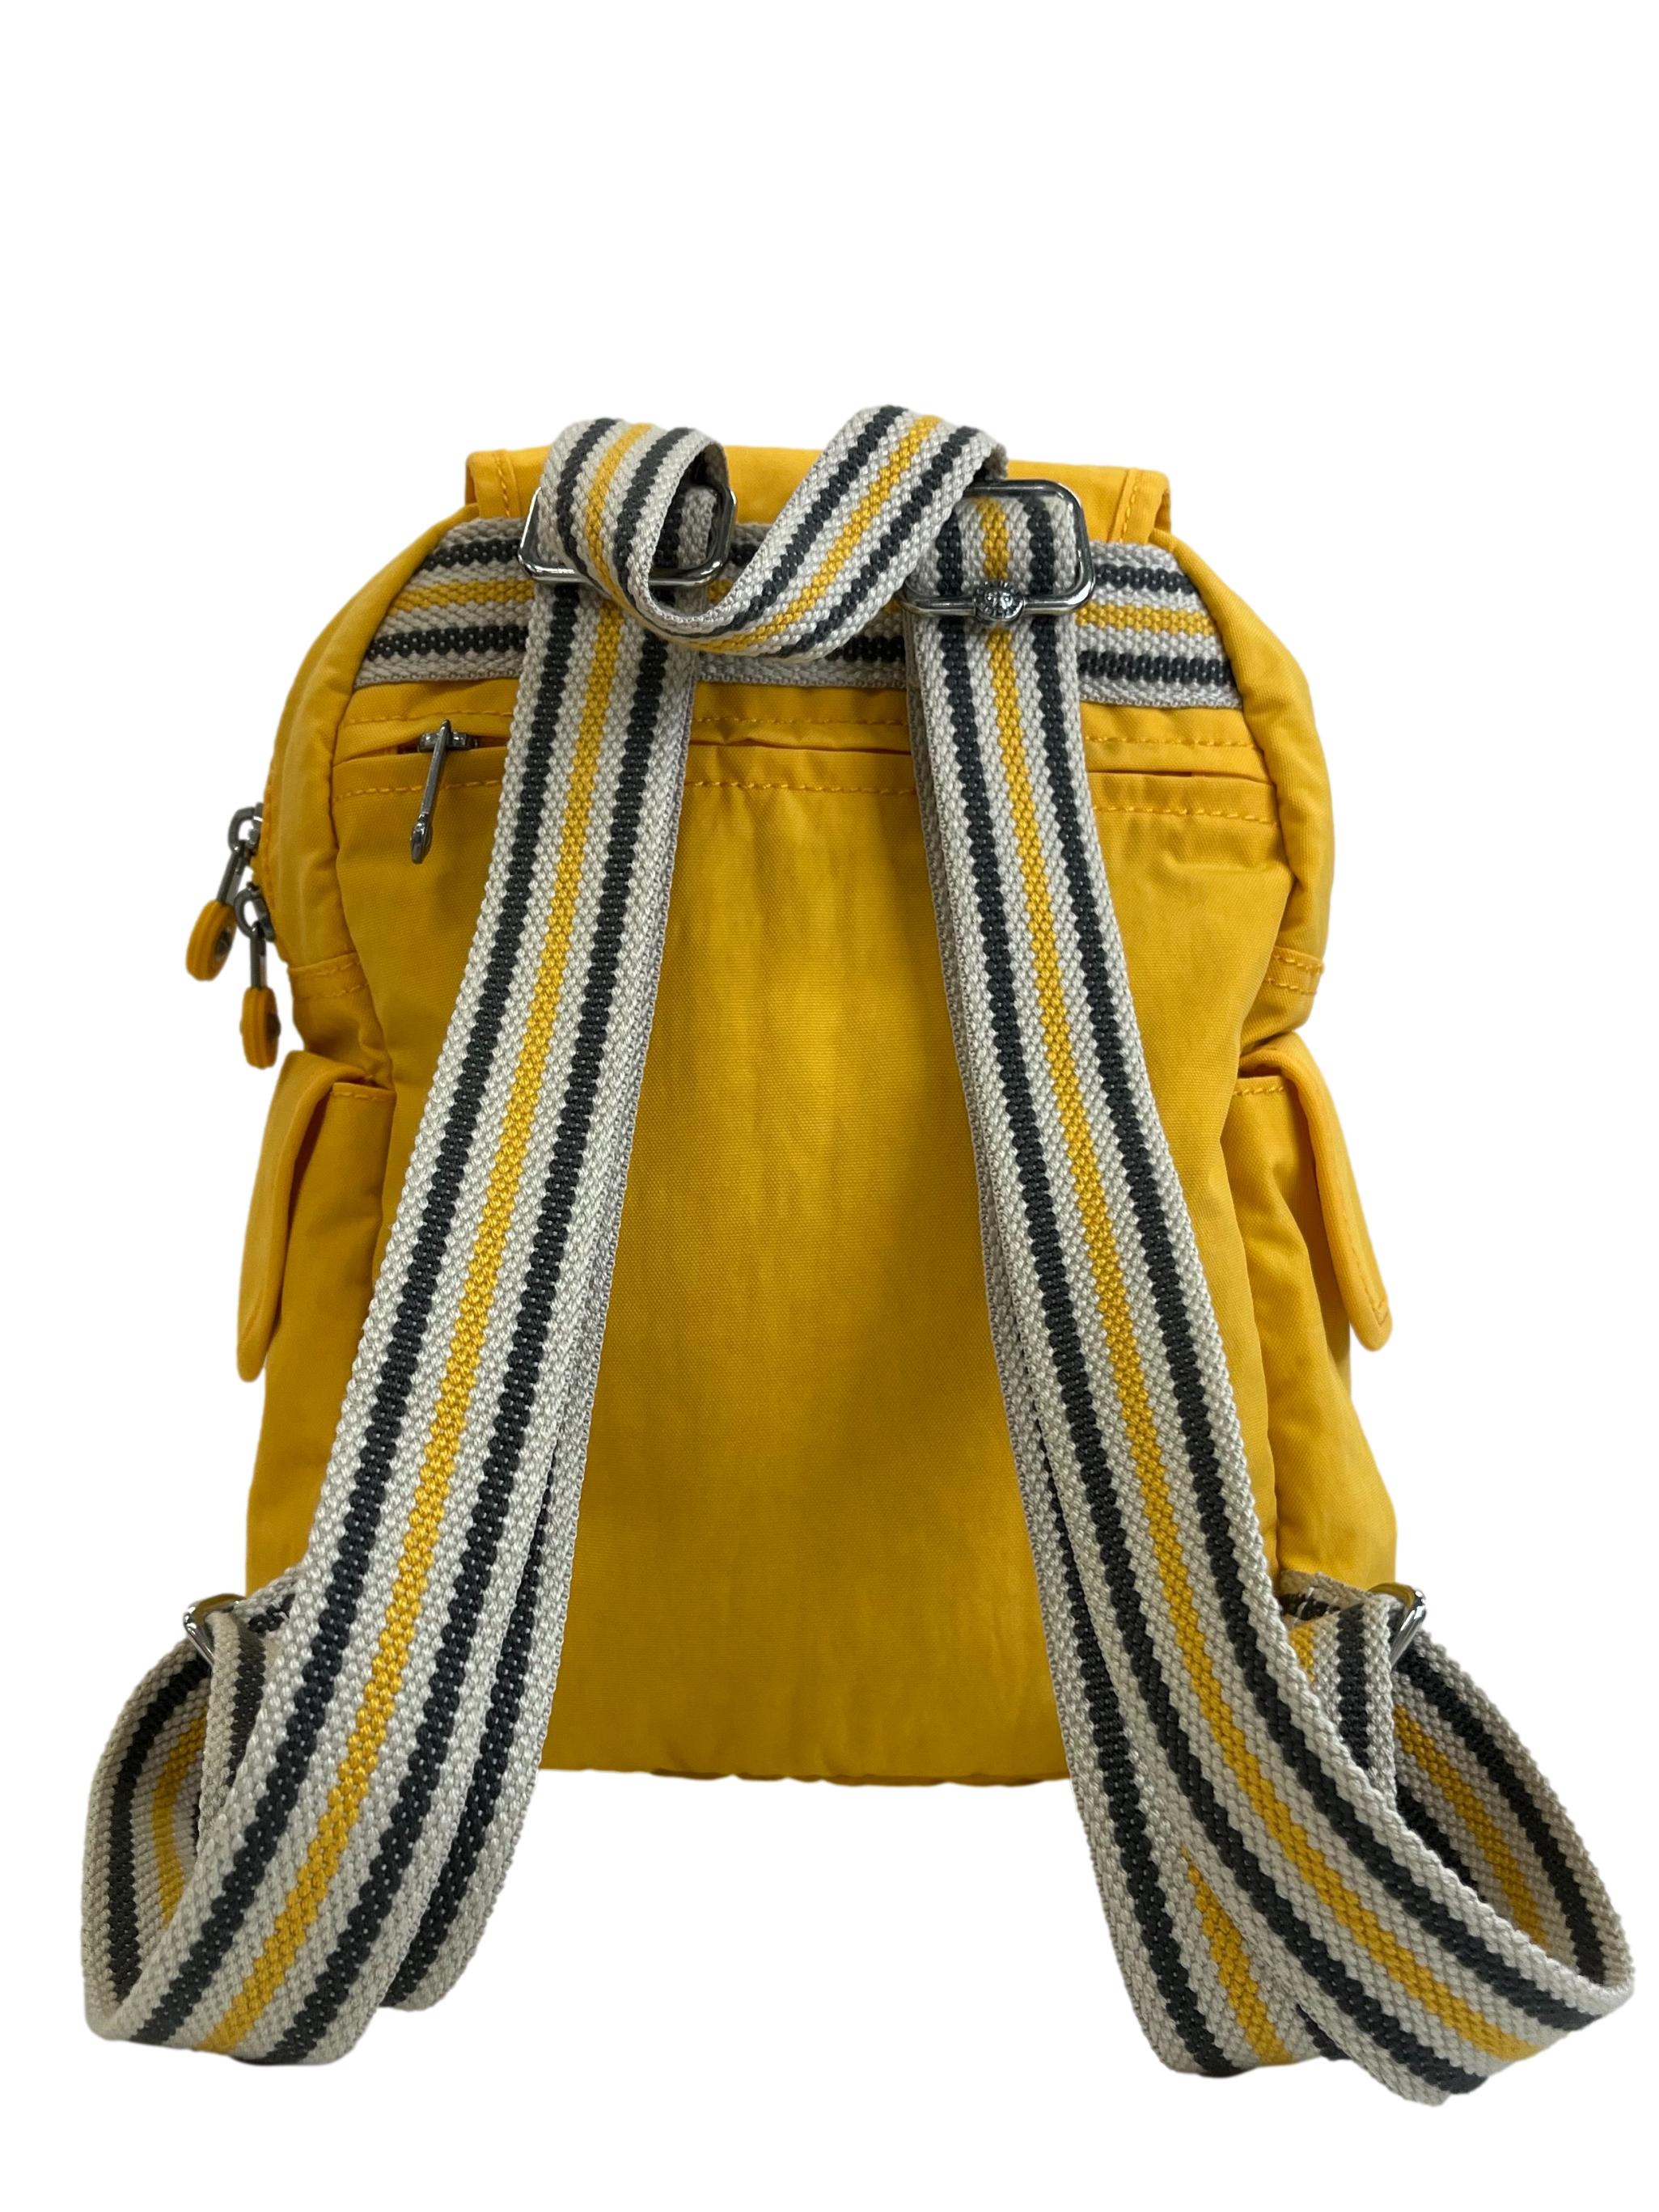 Daffodil Yellow City Pack Backpack